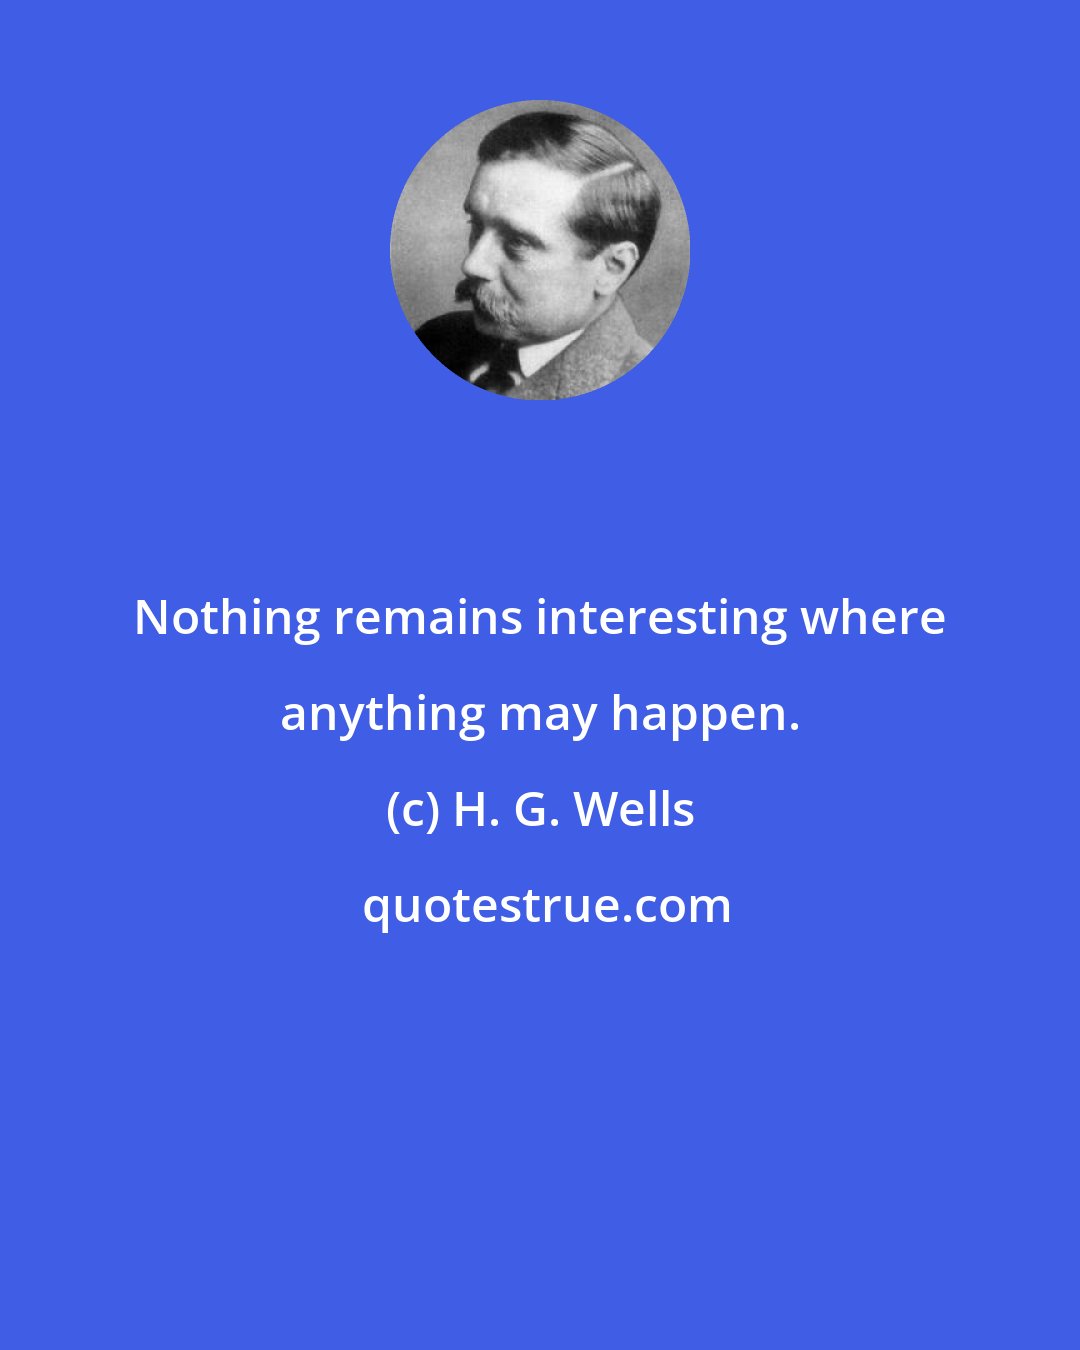 H. G. Wells: Nothing remains interesting where anything may happen.